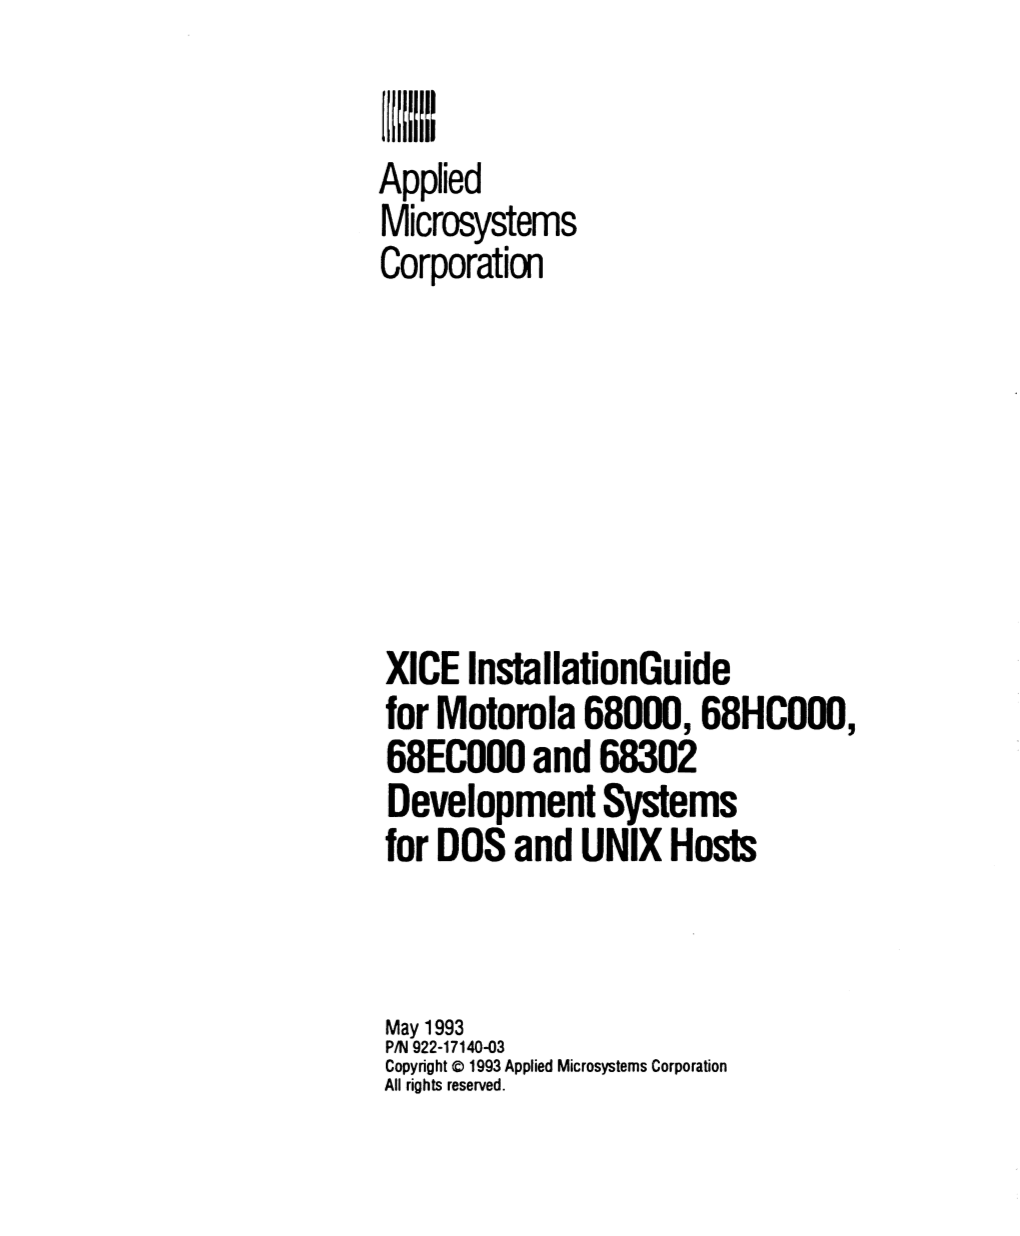 XICE Lnstallationguide for Motorola 68000, 68HCOOO, 68ECOOO and 68302 Development Systems for DOS and UNIX Hosts